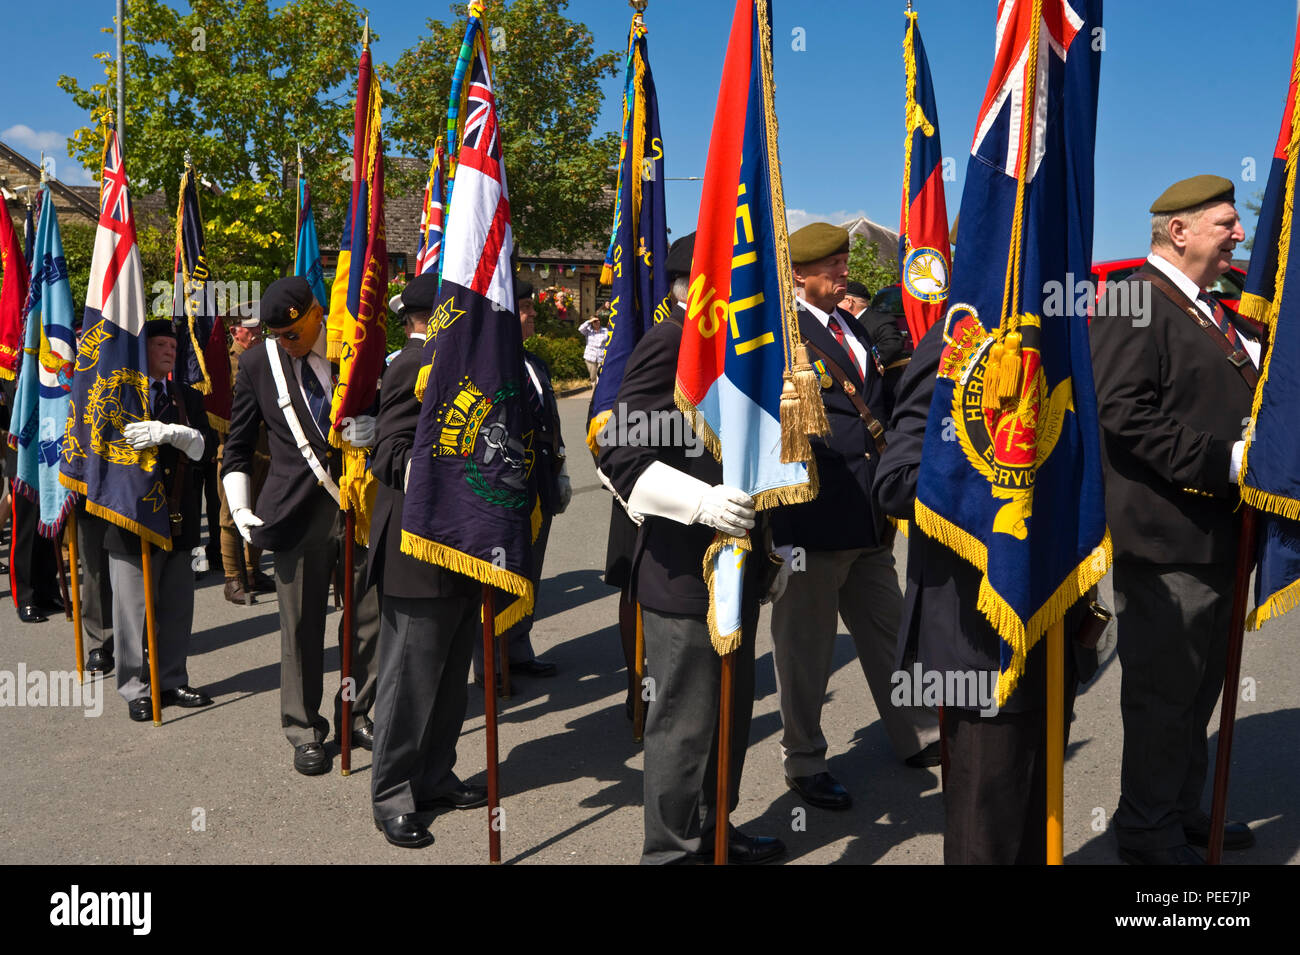 World War One commemorative event parade of military standards at Hay-on-Wye Powys Wales UK Stock Photo